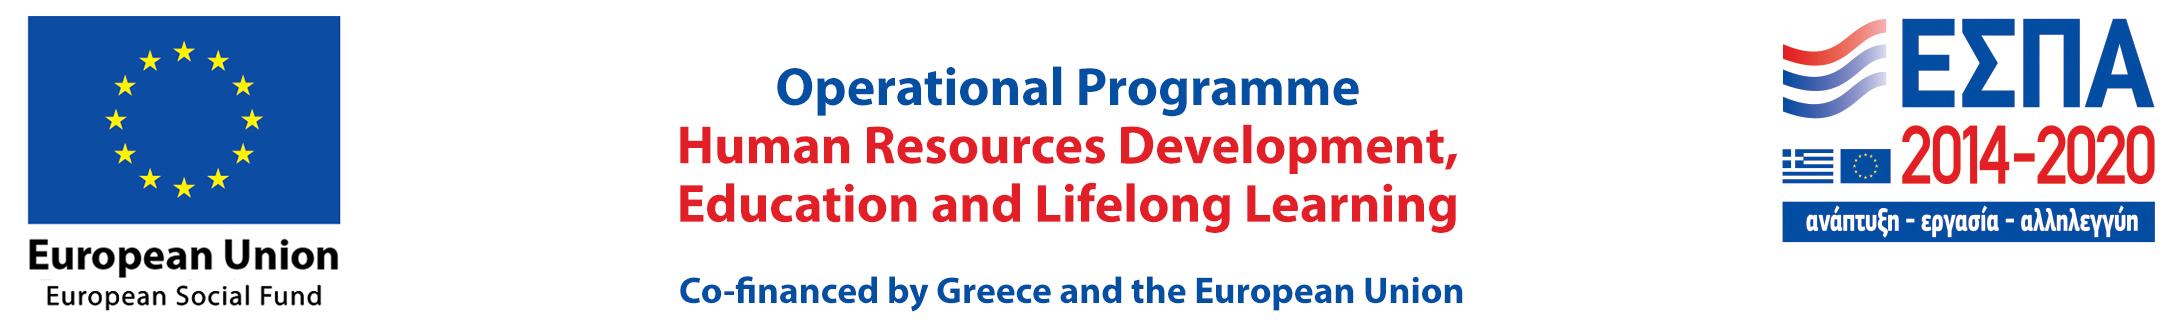 Operational Programme: Human Resources Development, Education and Lifelong Learning